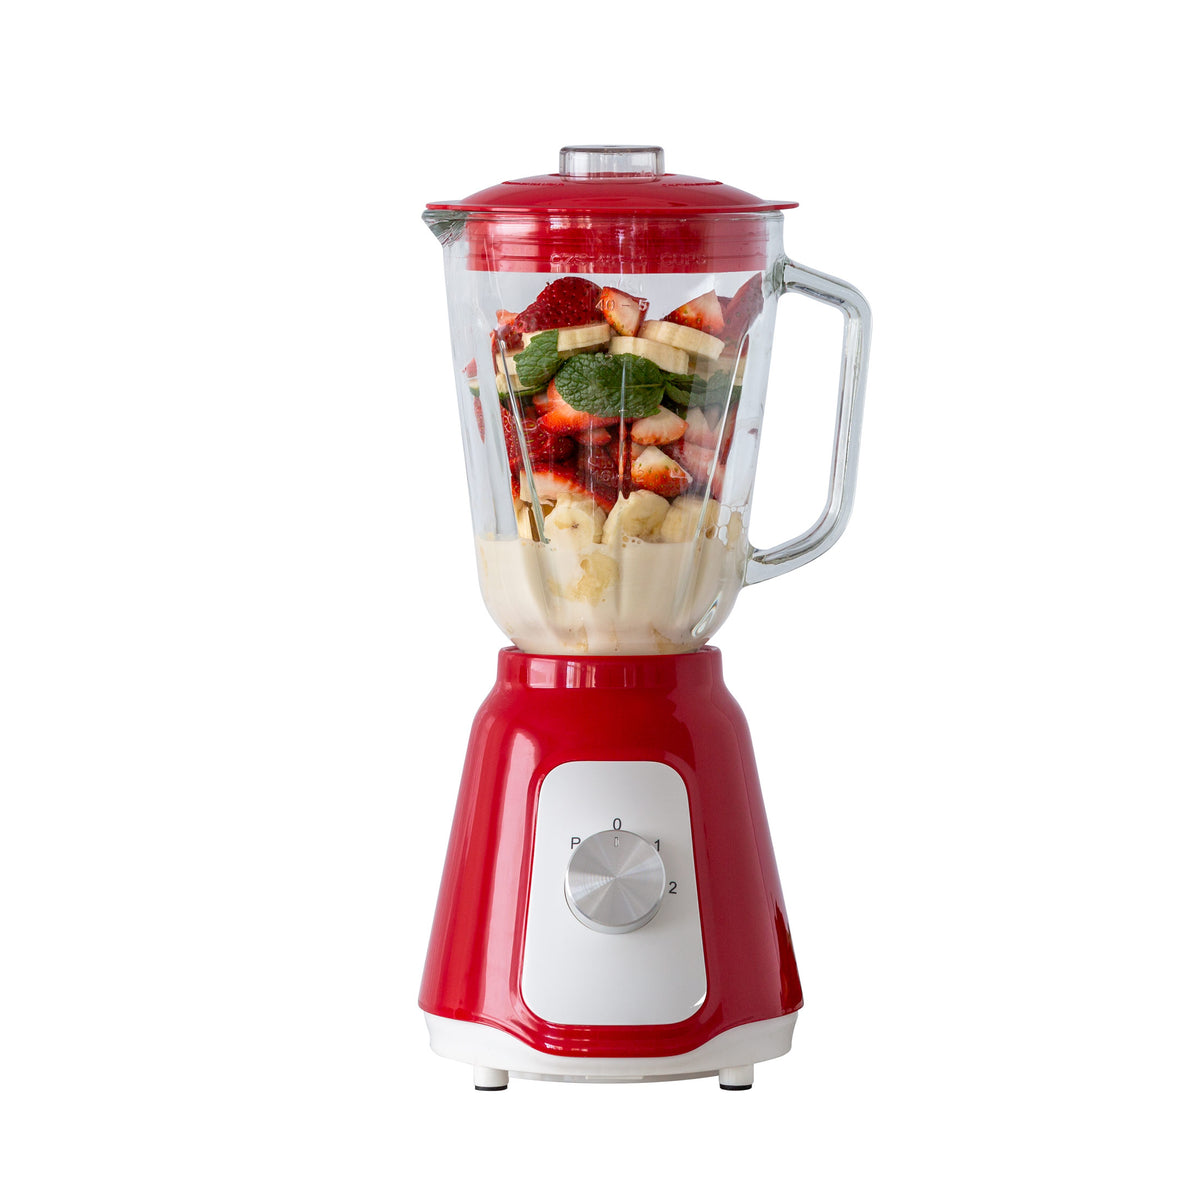 Red table blender filled with fruit ready to make a perfect smoothie.